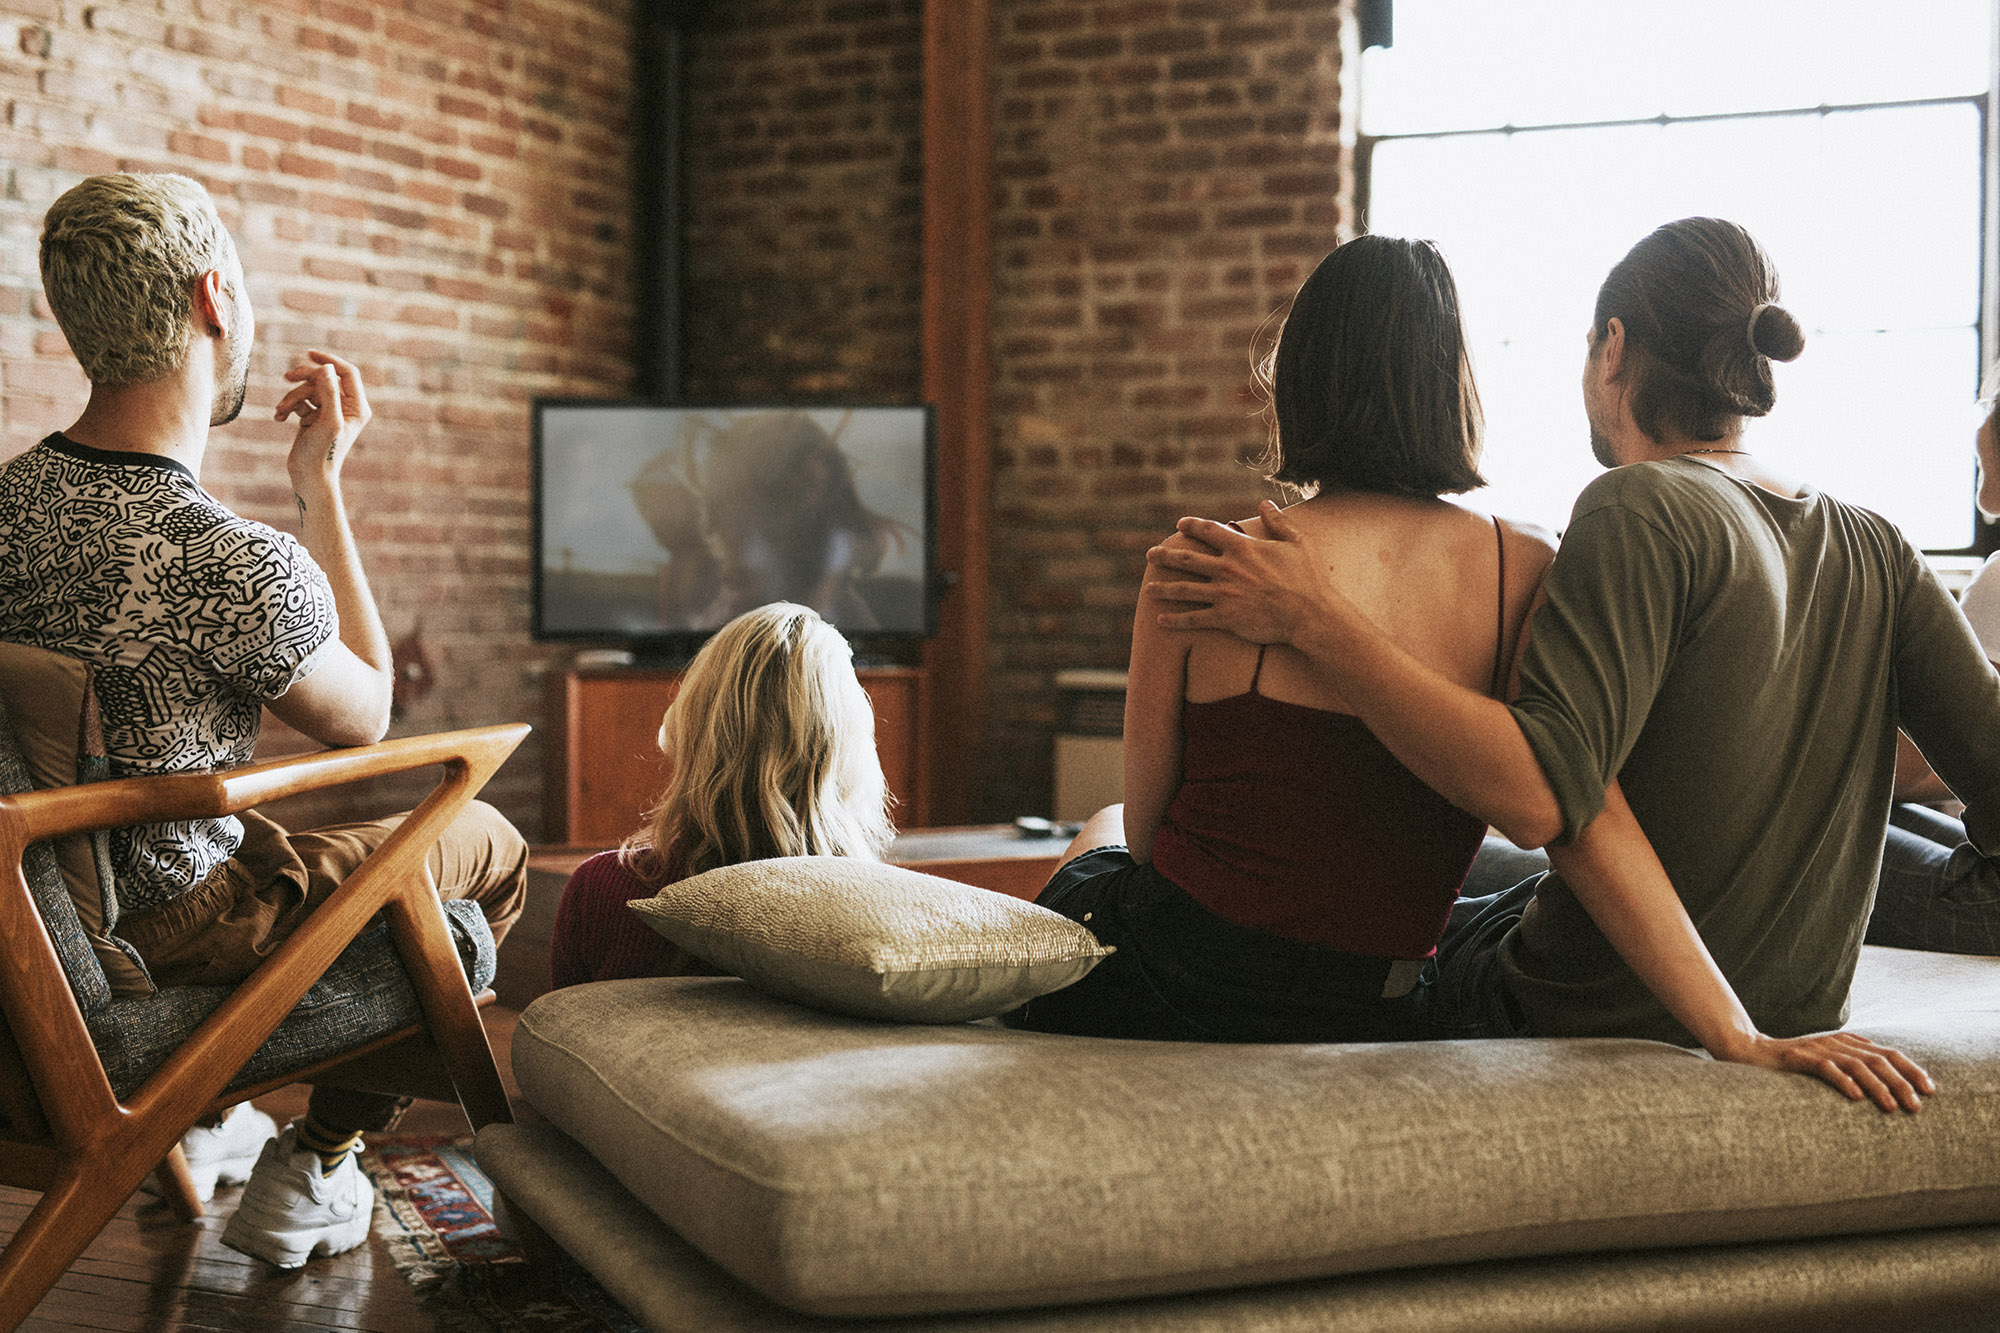 Group of young adults watch TV together in an apartment 